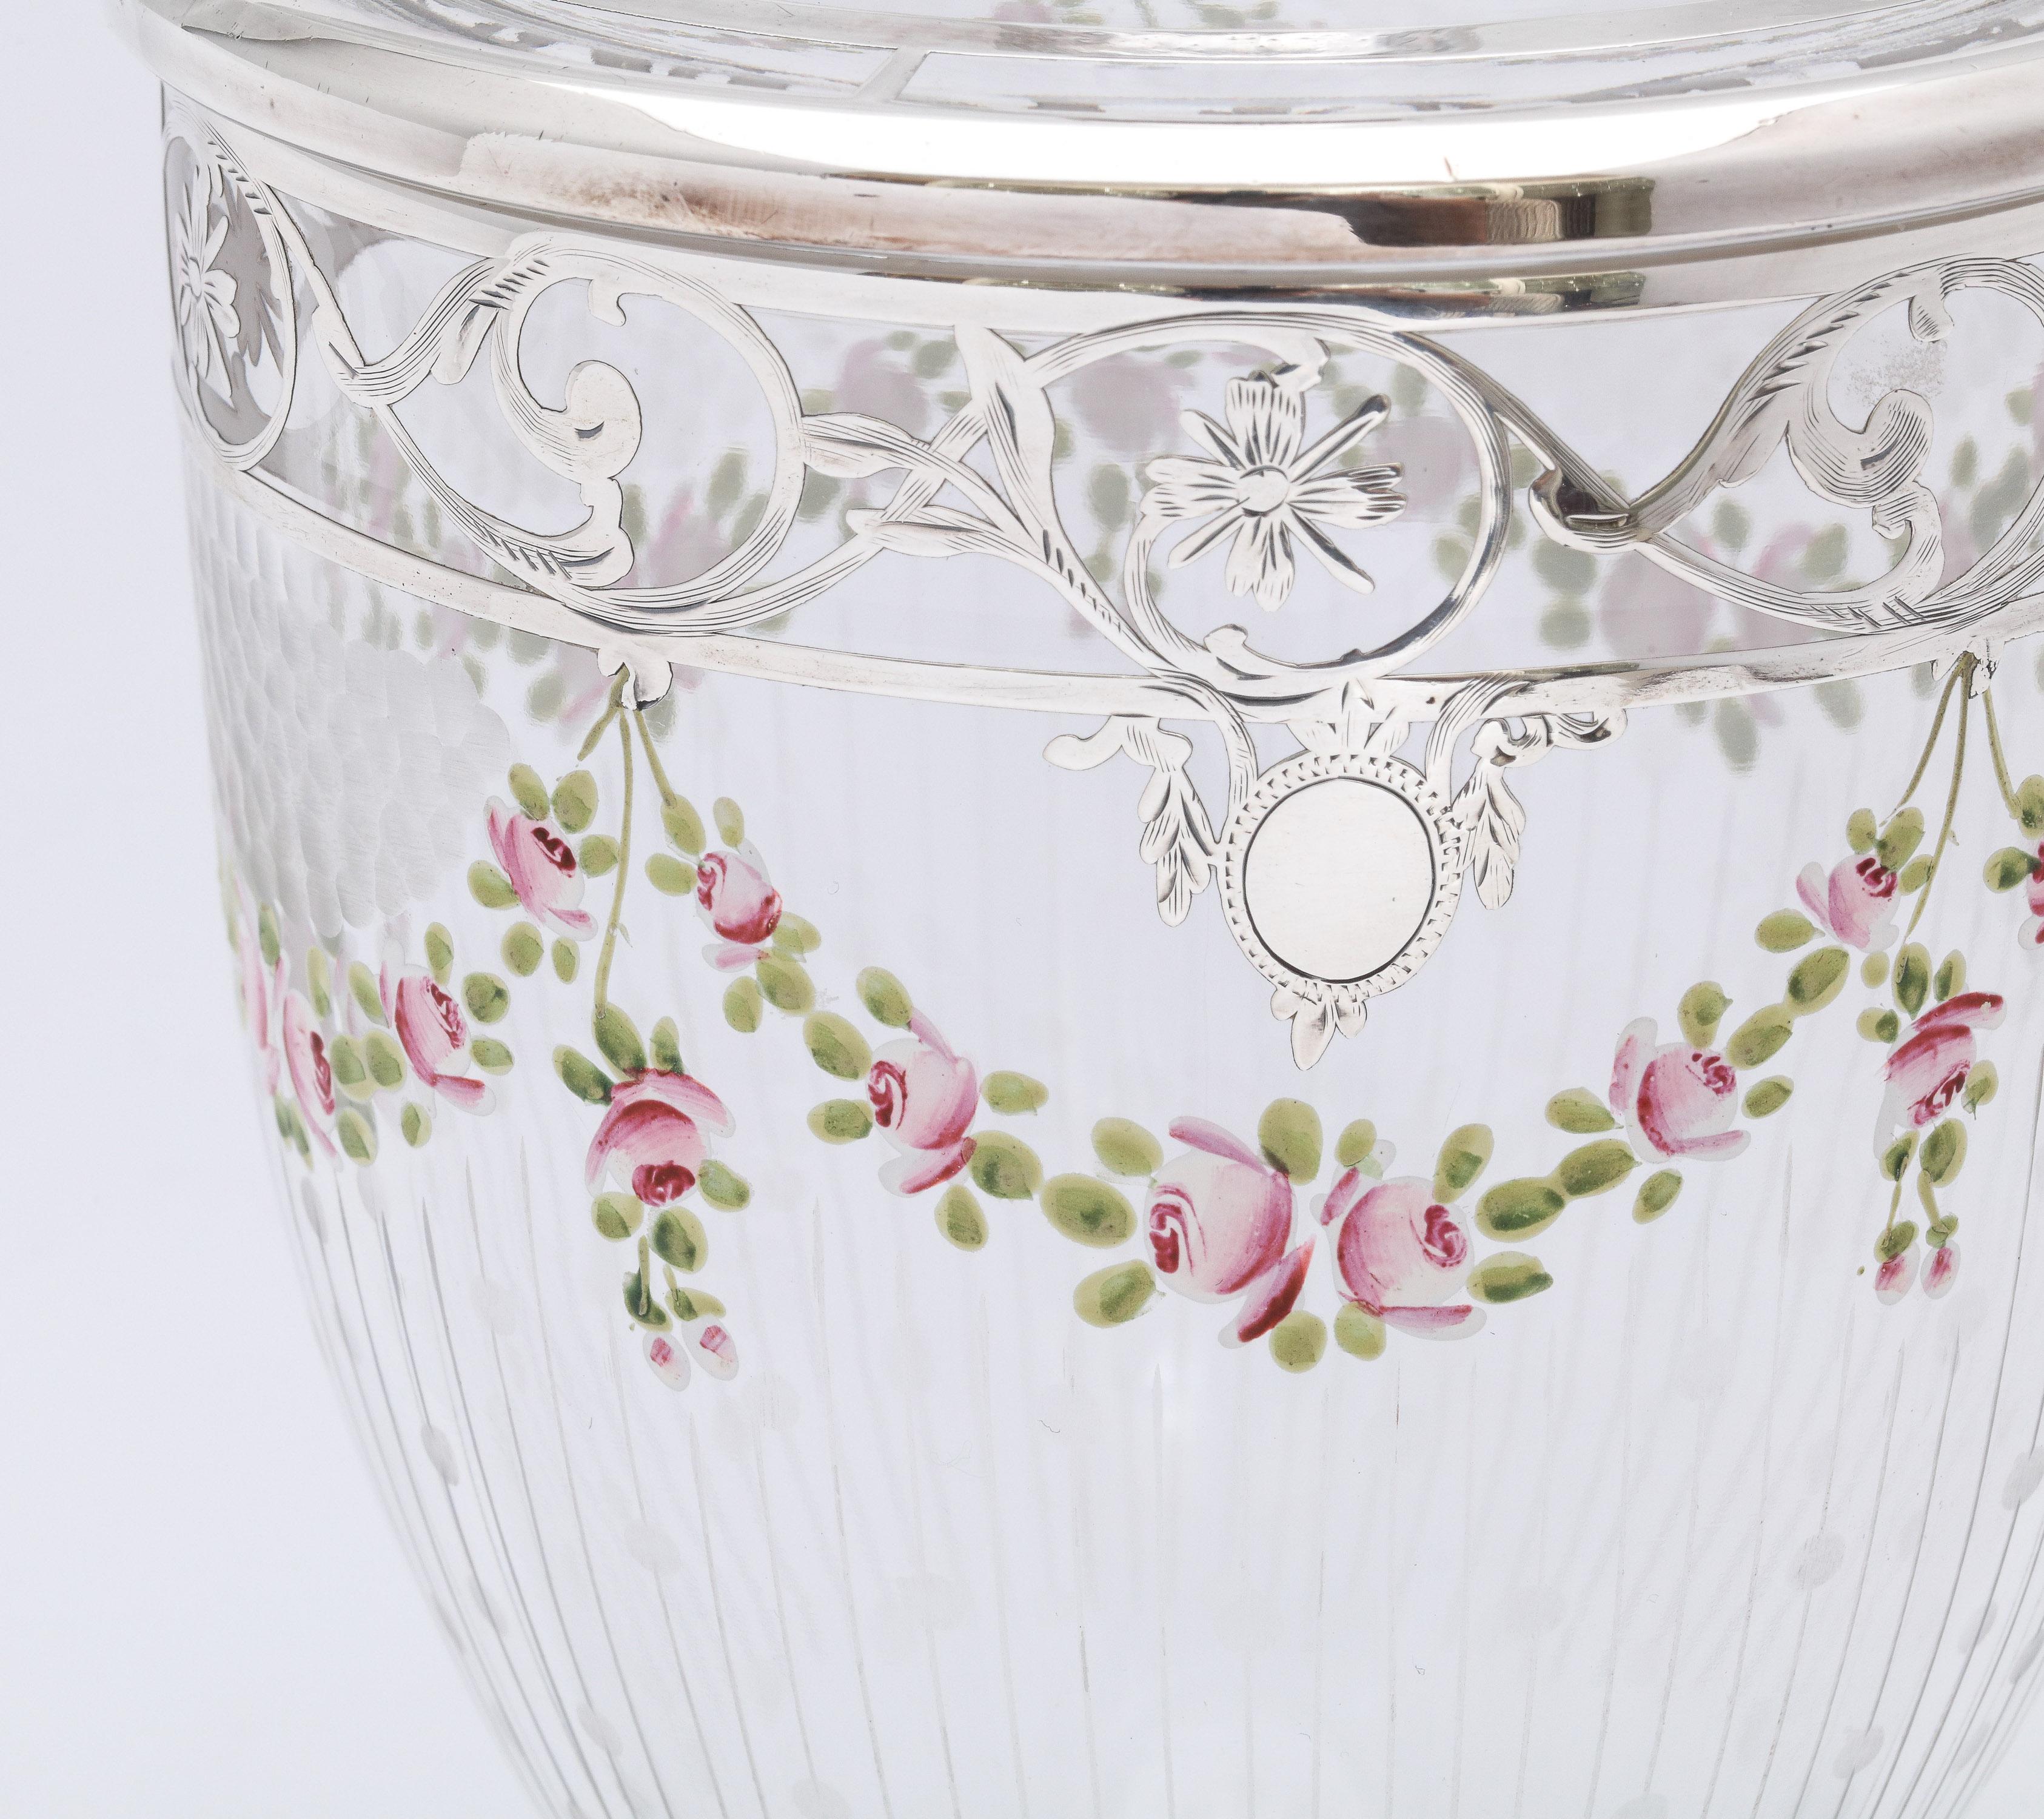 Edwardian Period Sterling Silver-Overlay and Enamel Sweetmeats Jar For Sale 2